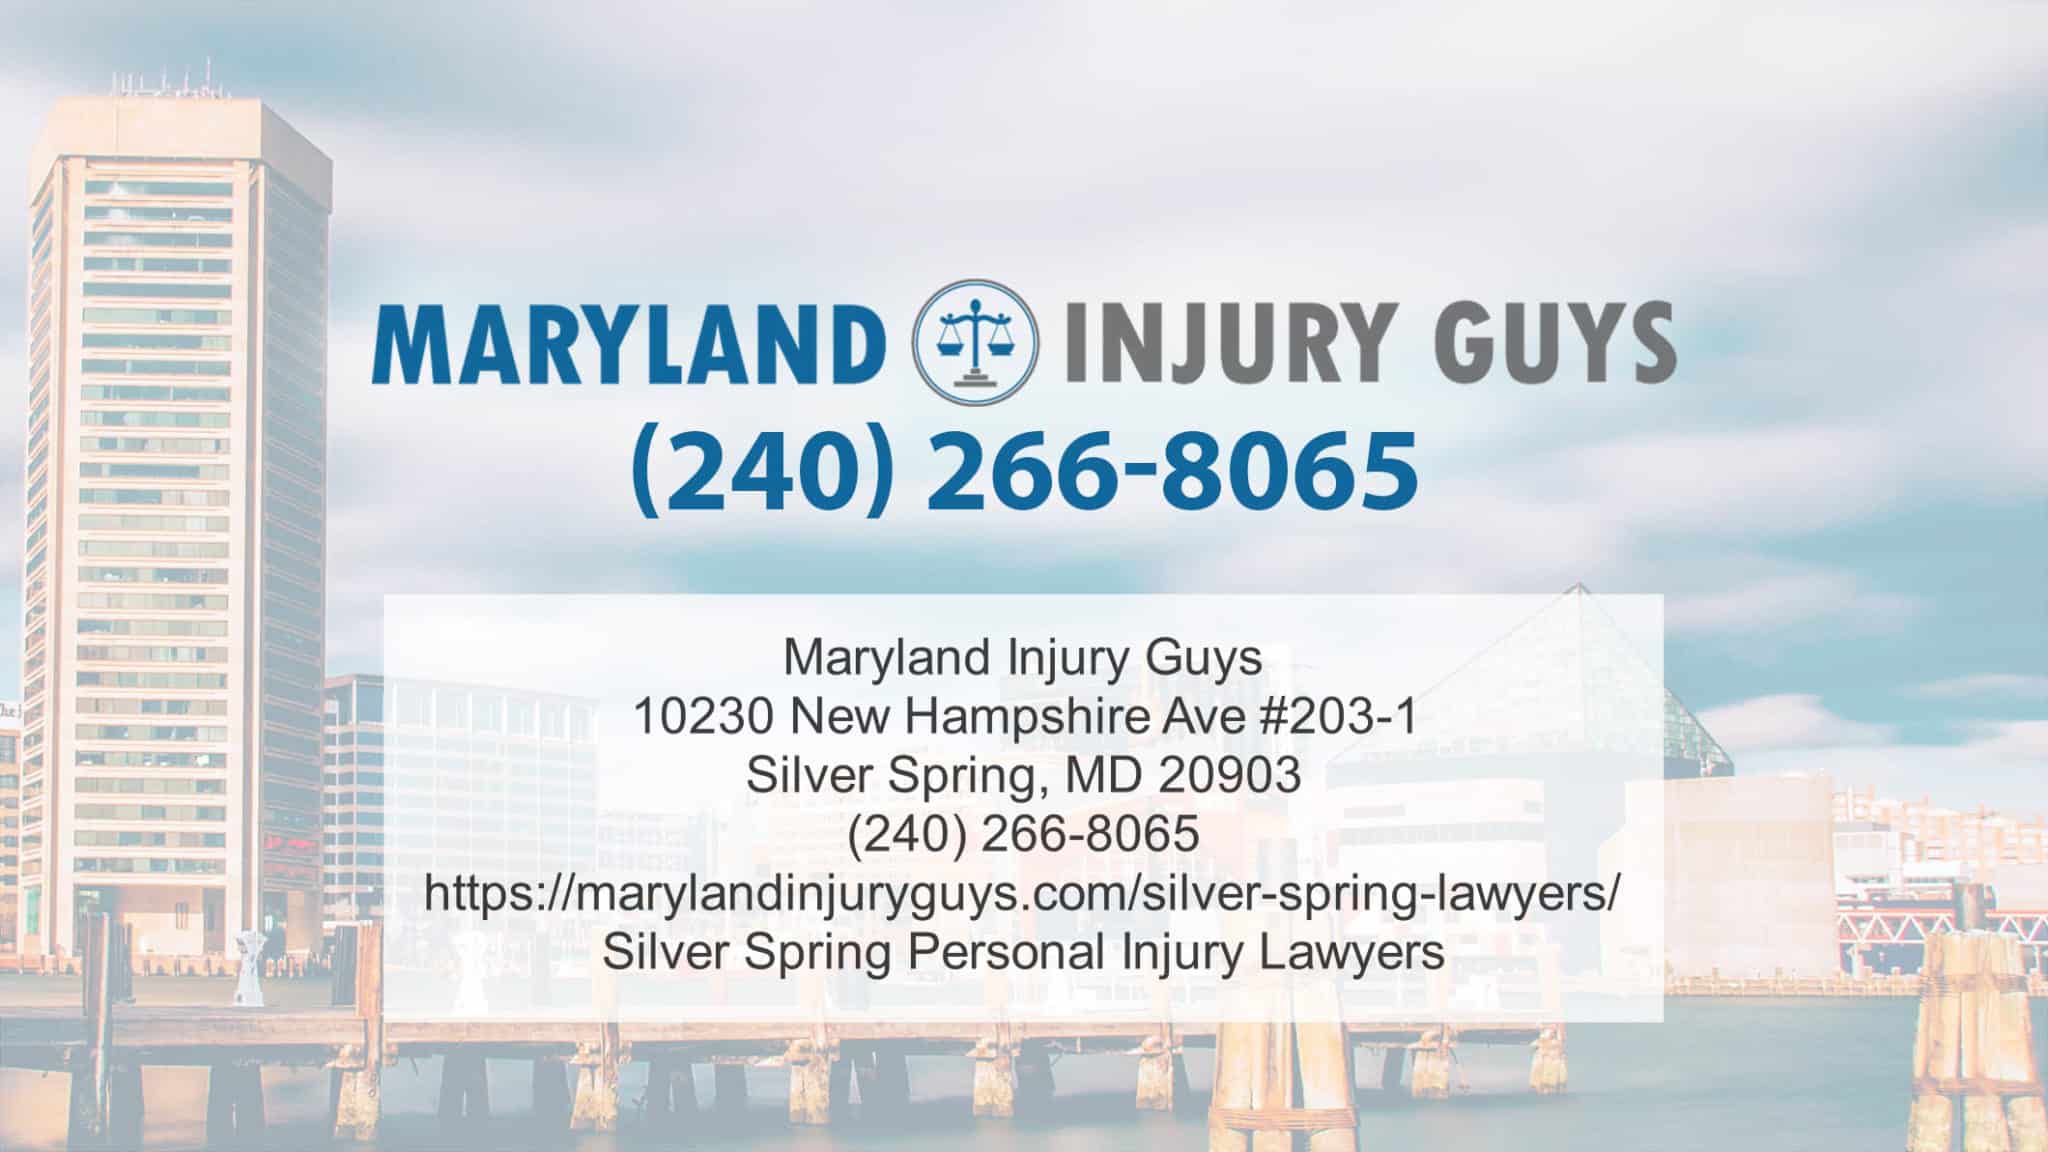 Top Baltimore Auto Accident Lawyers Help Injured Victims Get Max Compensation